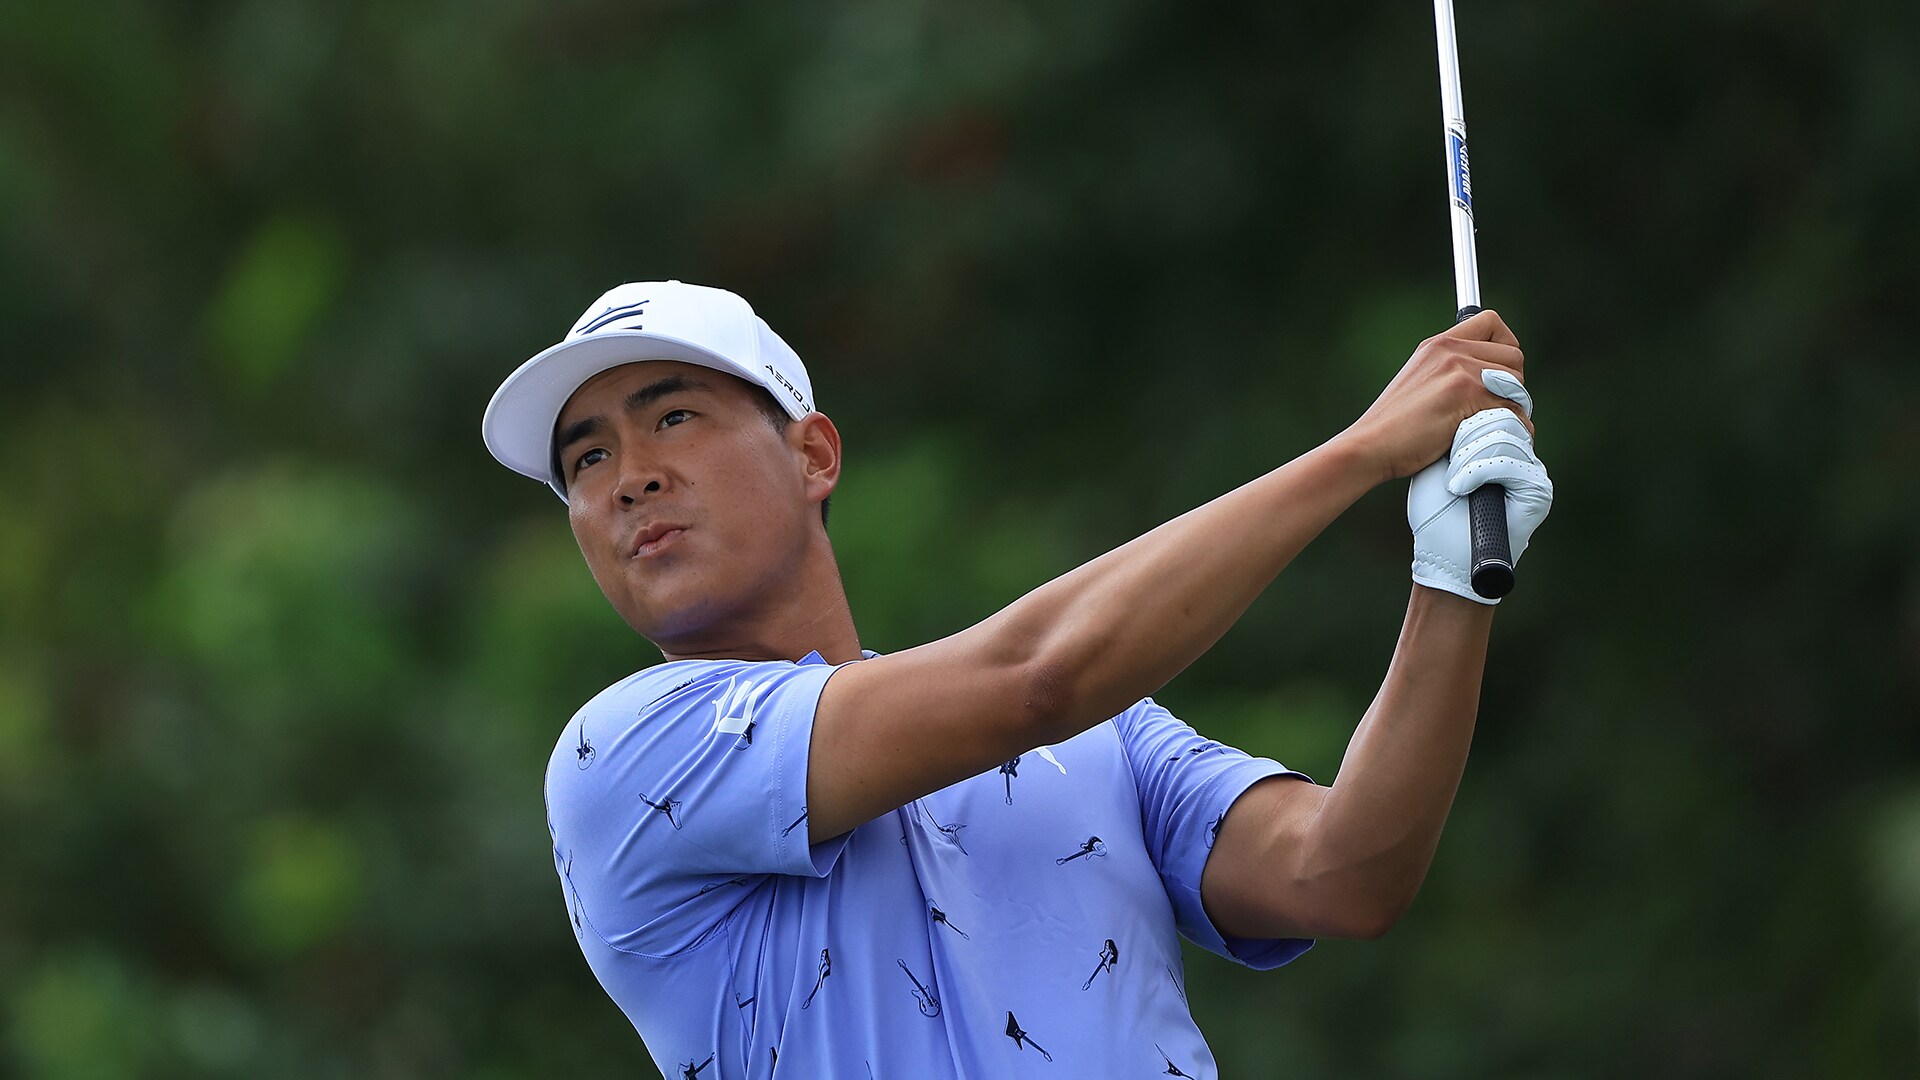 Despite less-than-ideal prep, Justin Suh out front at Honda Classic